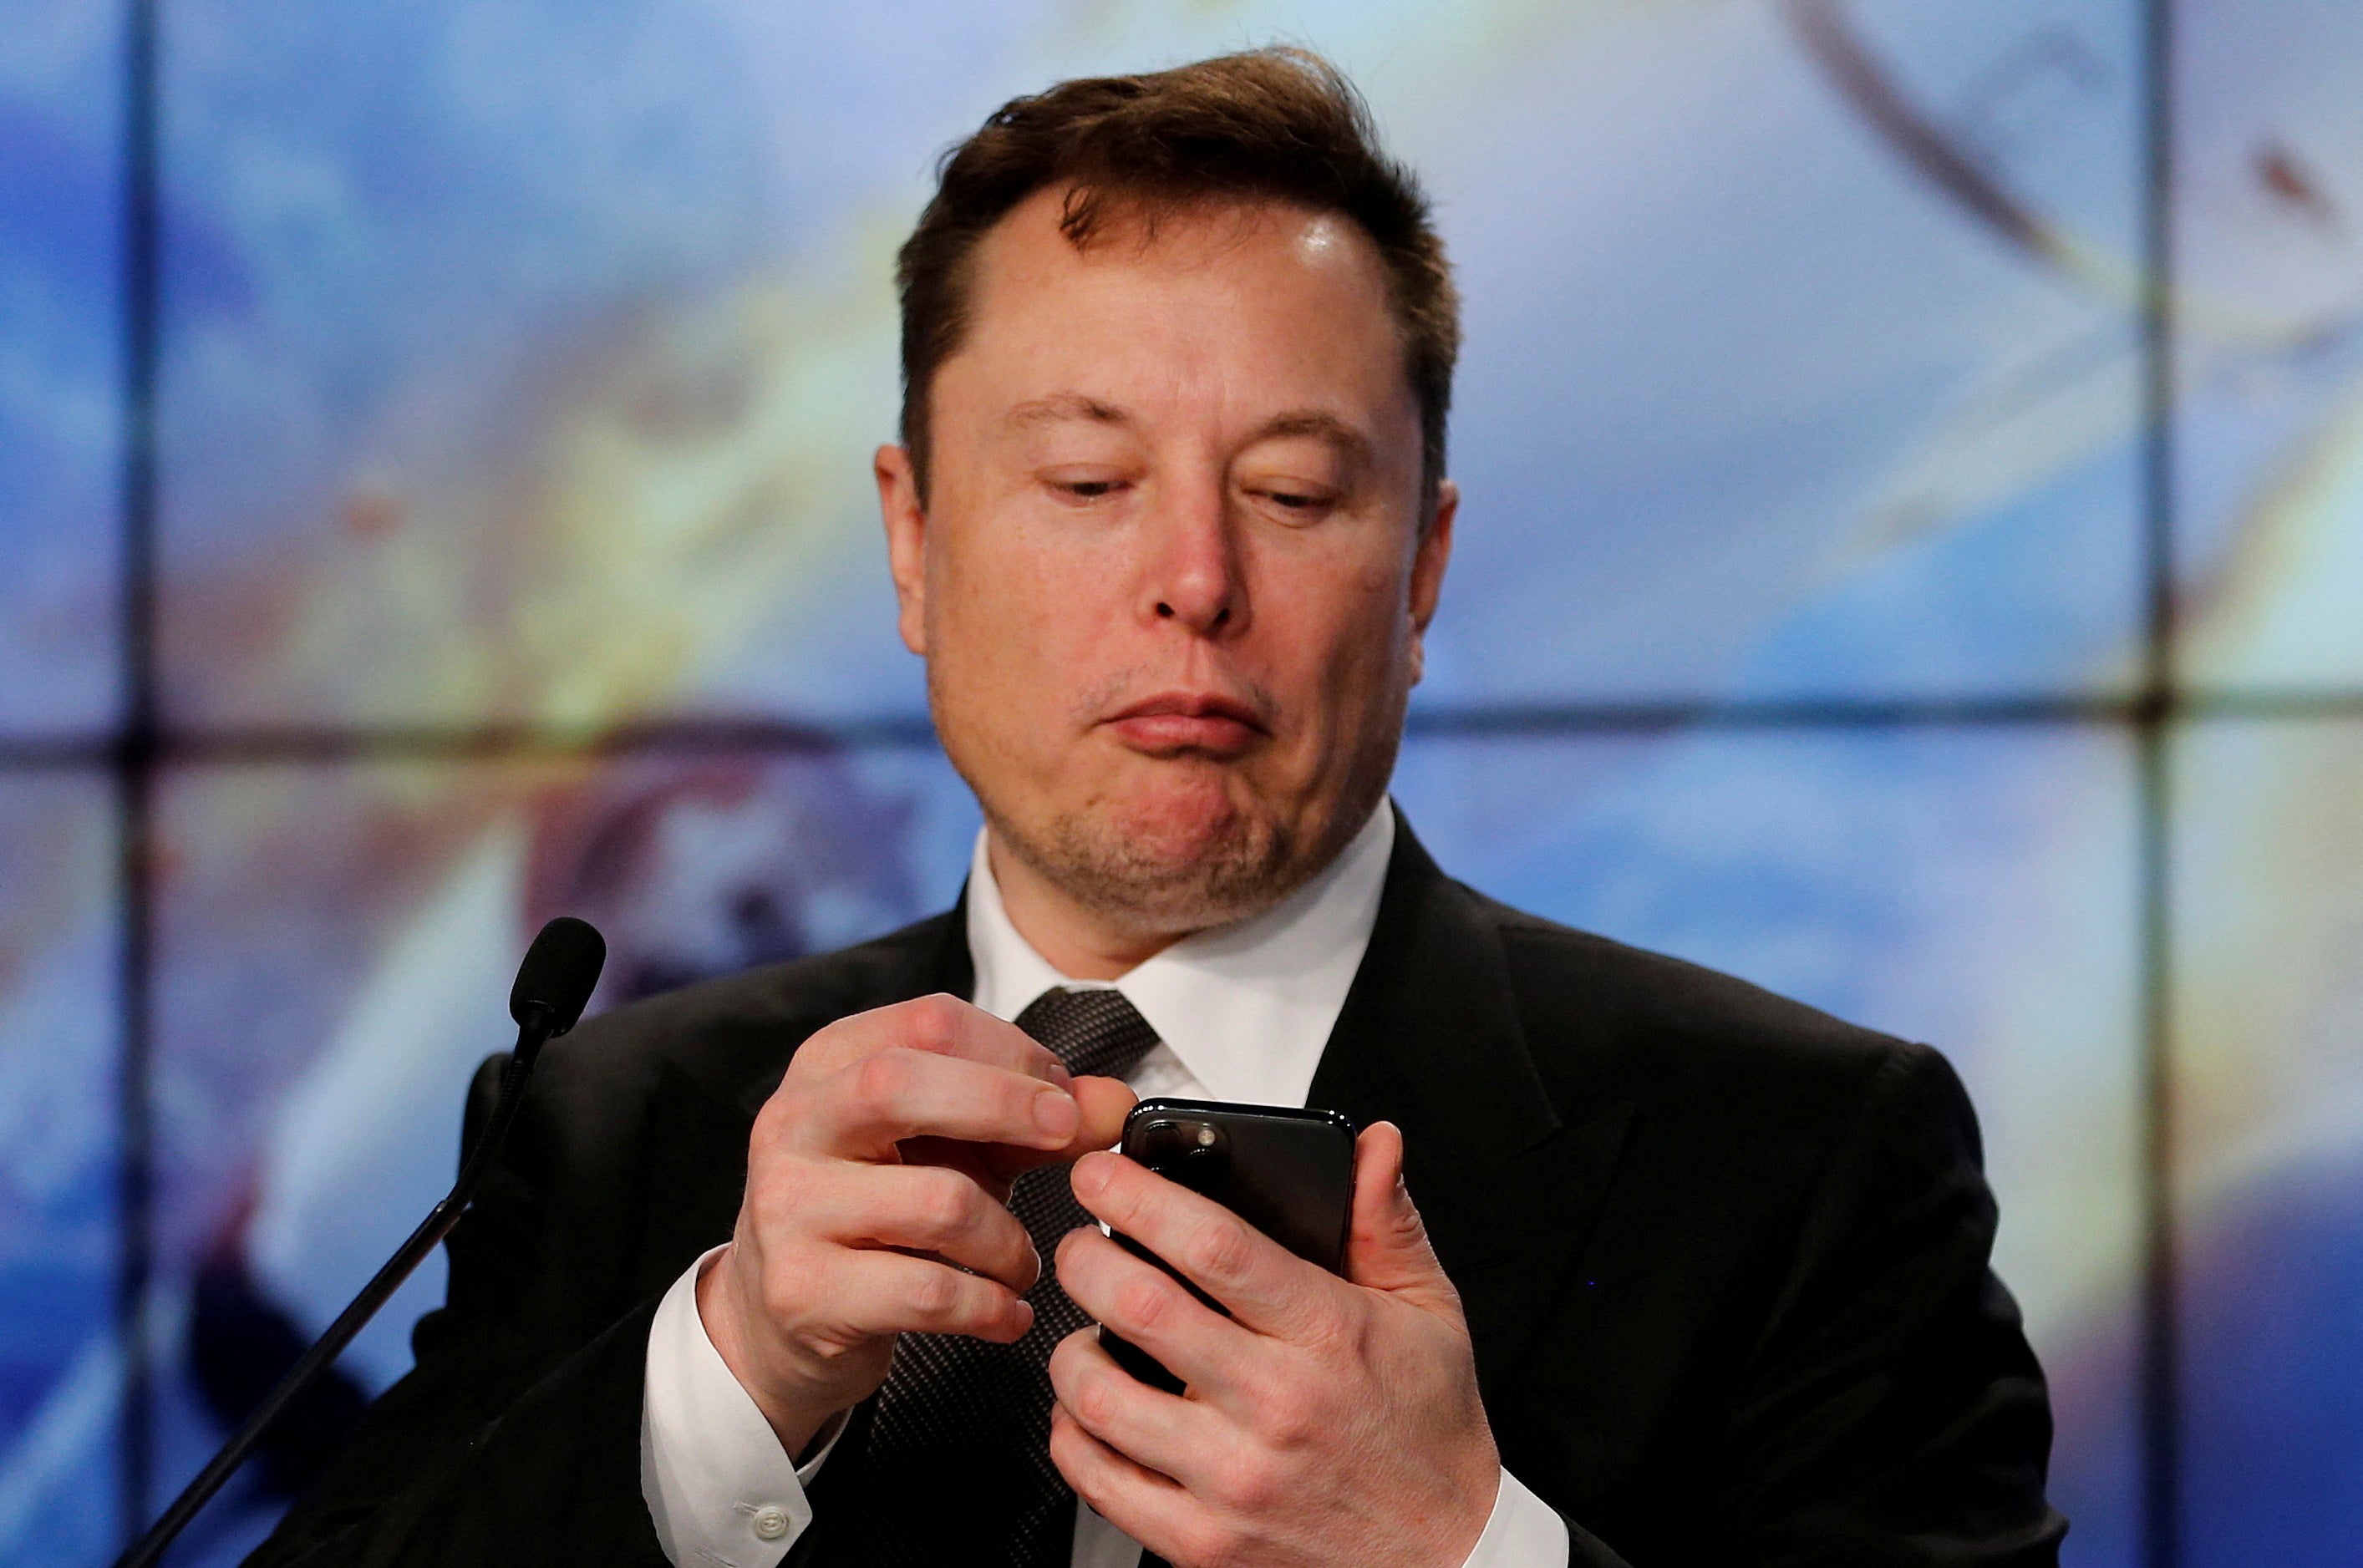 Mr Musk has claimed that Twitter did not give him information about fake accounts and spambots